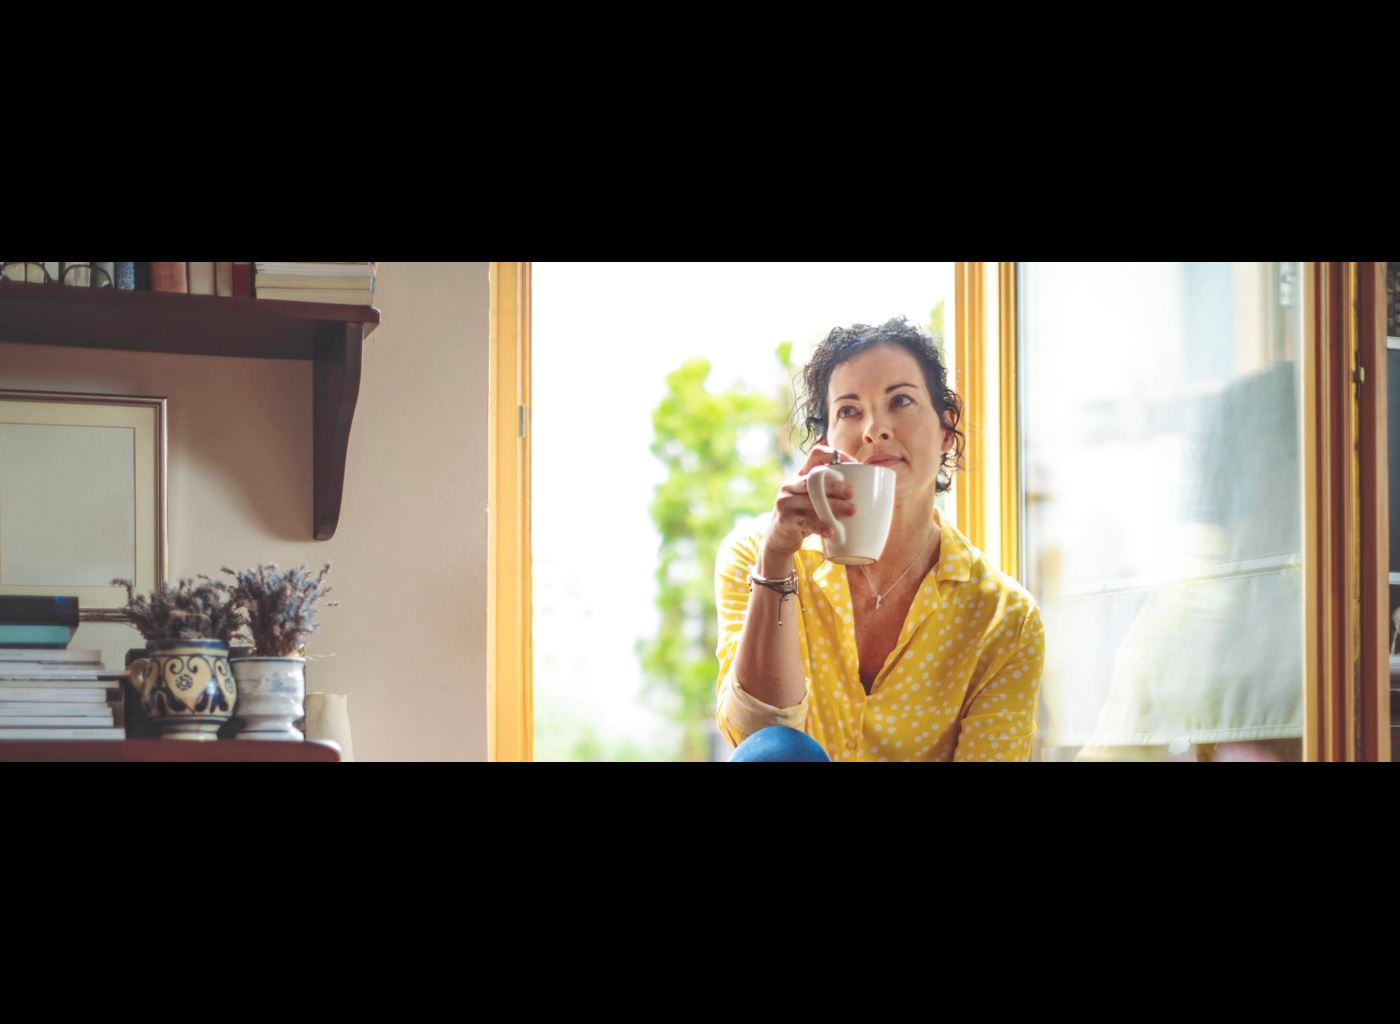 Mature woman is having the morning coffee at home